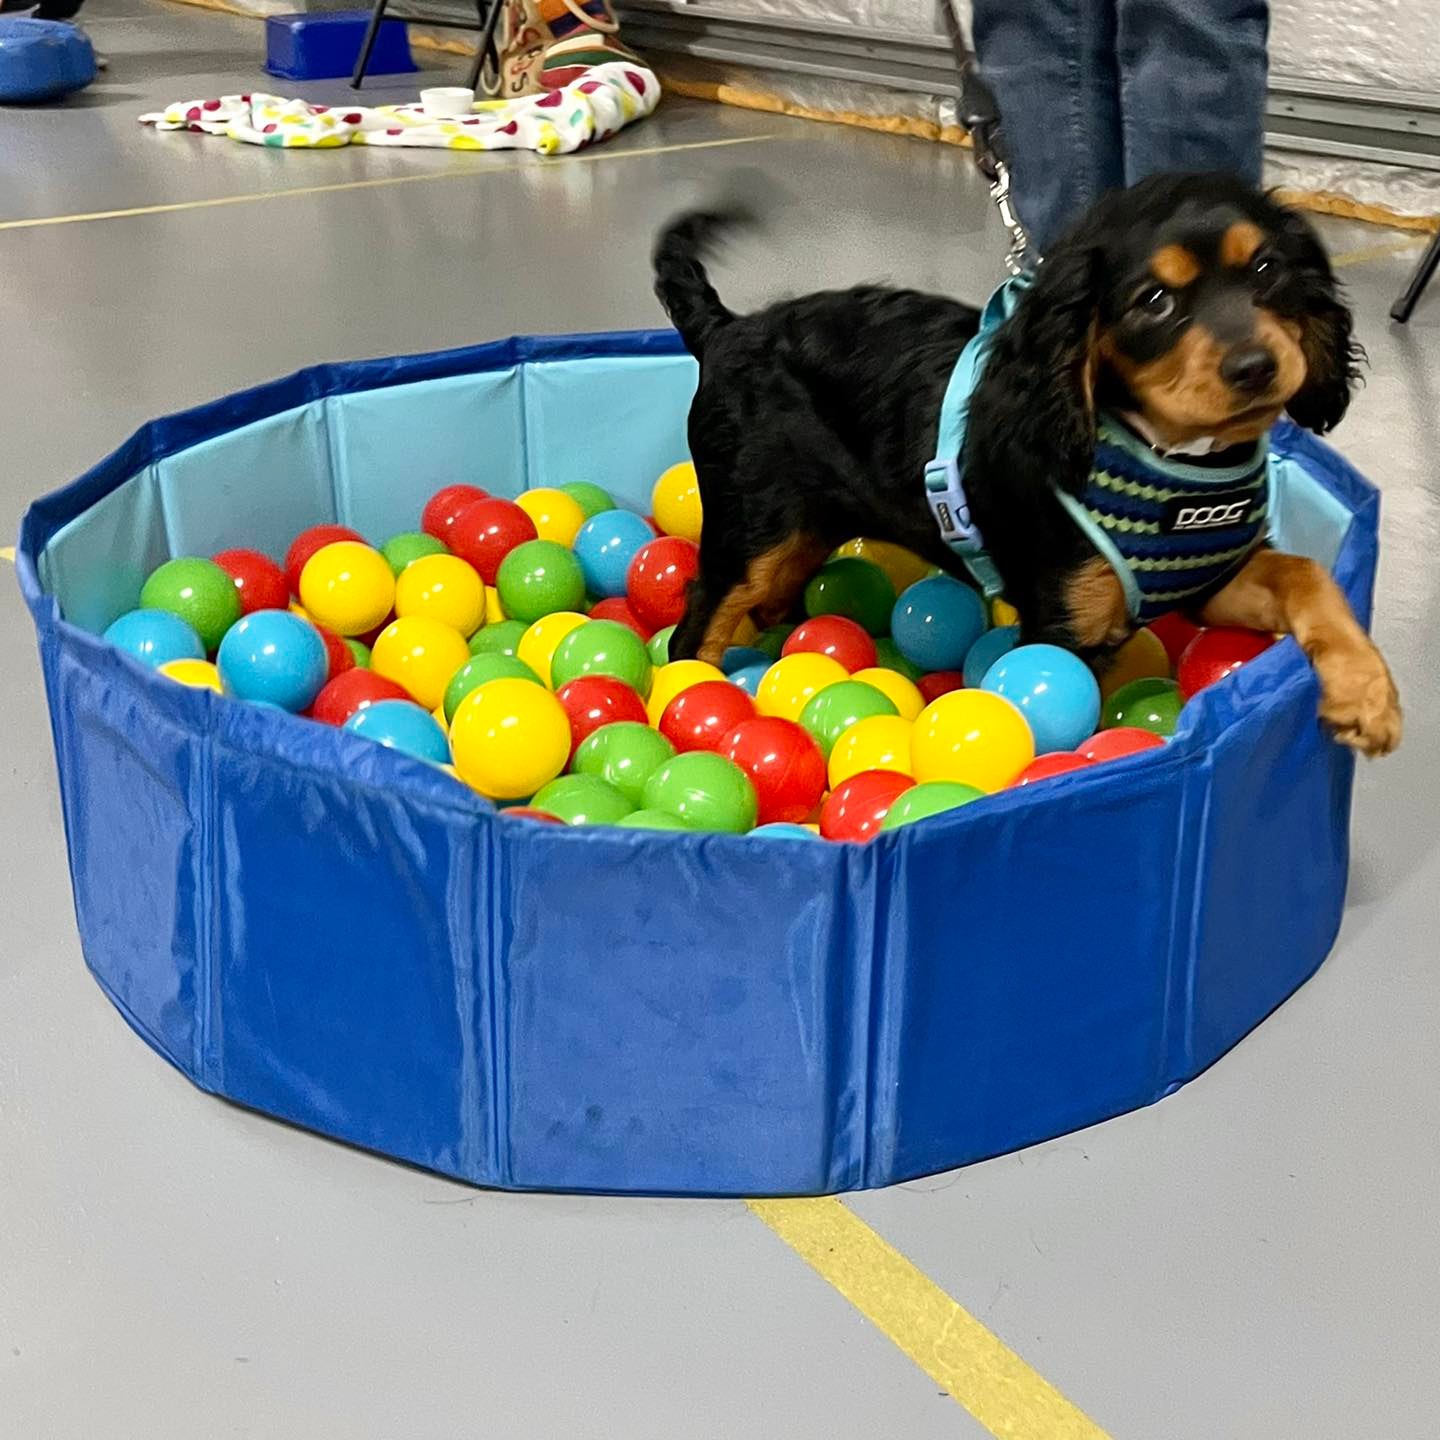 A dog named Millie in a multicoloured ball pit